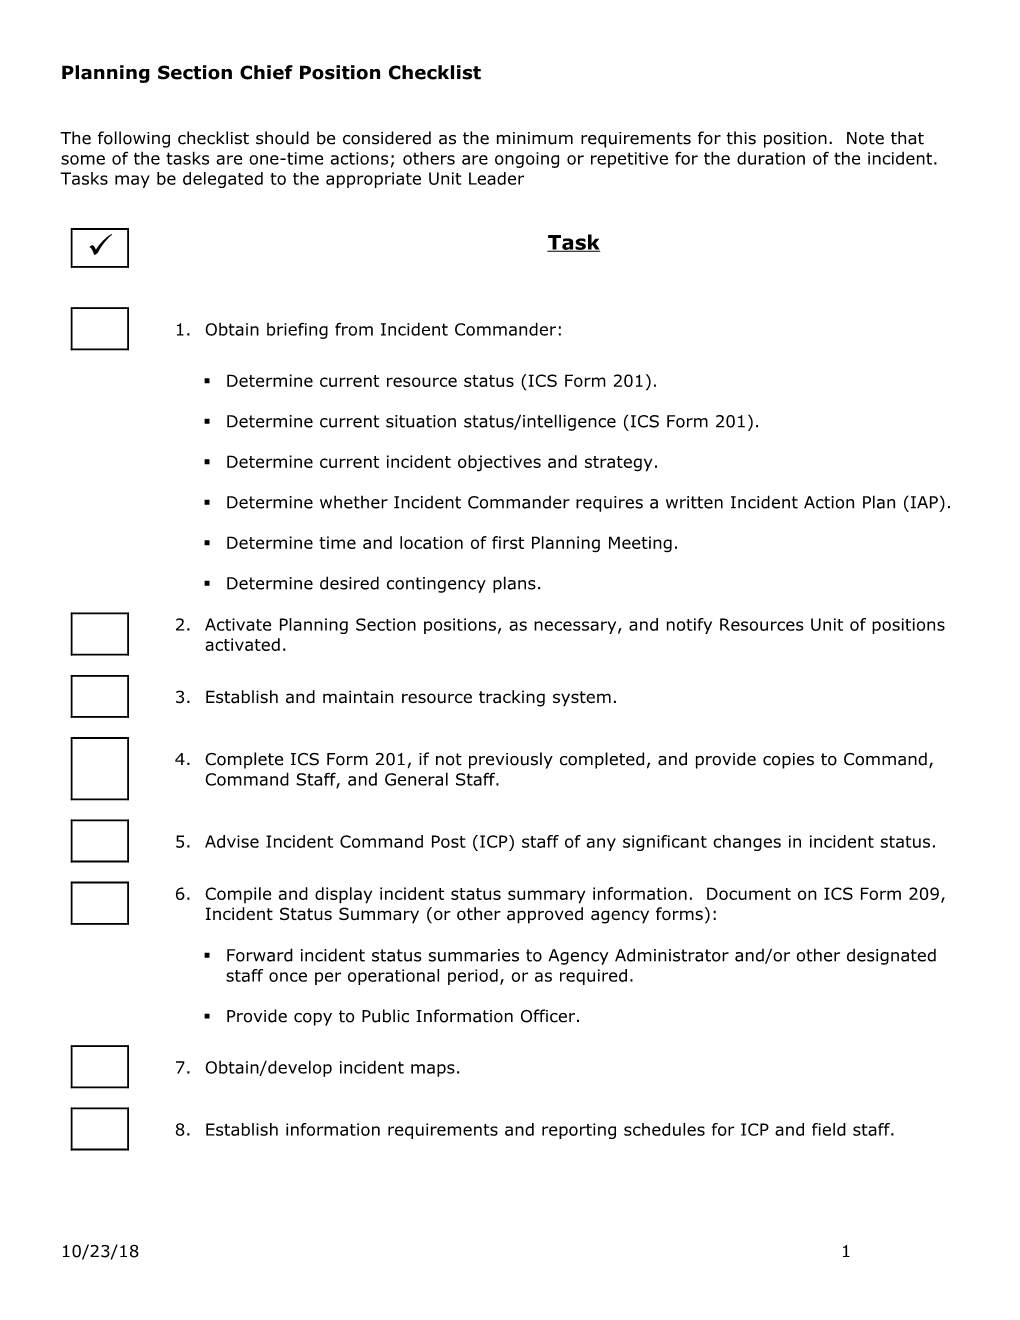 Planning Section Chief Position Checklist